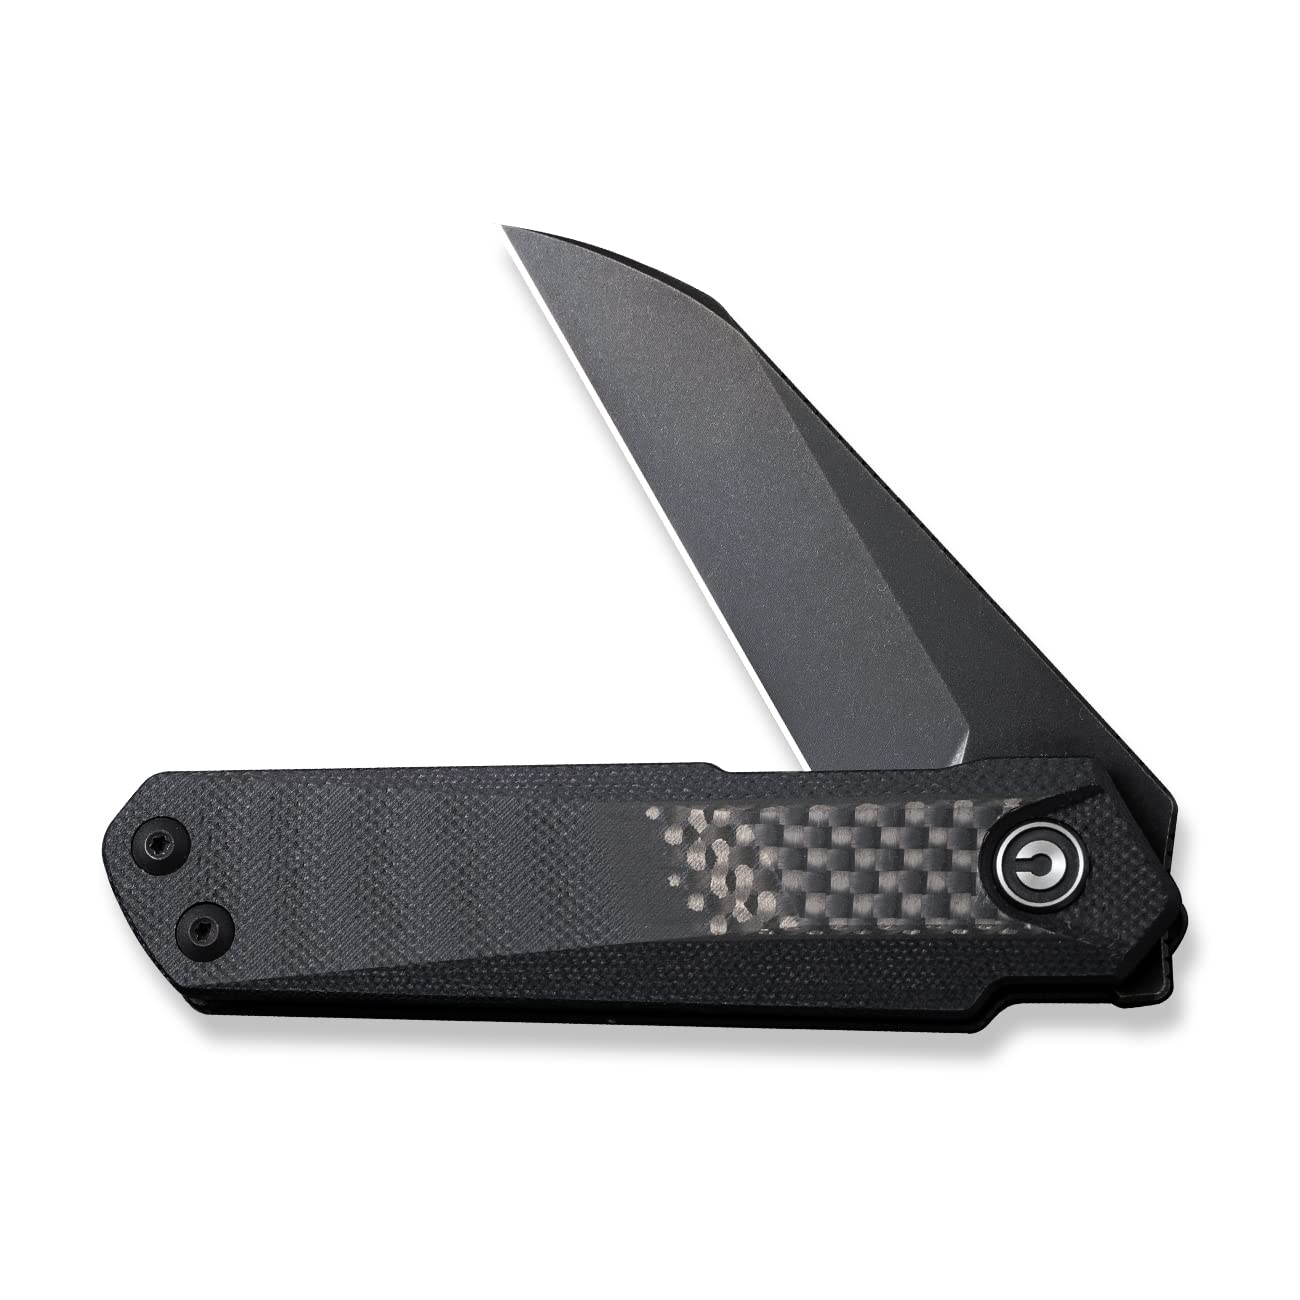 CIVIVI Ki-V Plus Front Flipper Pocket Knife, 2.52-in Nitro-V Blade Reverse Tanto Small Folding Knife, Twill Carbon Fiber Overlay On G10 Handle Utility Knife with Deep Carry Pocket Clip for Camping Hiking Hunting,6.10 inch / 155mm